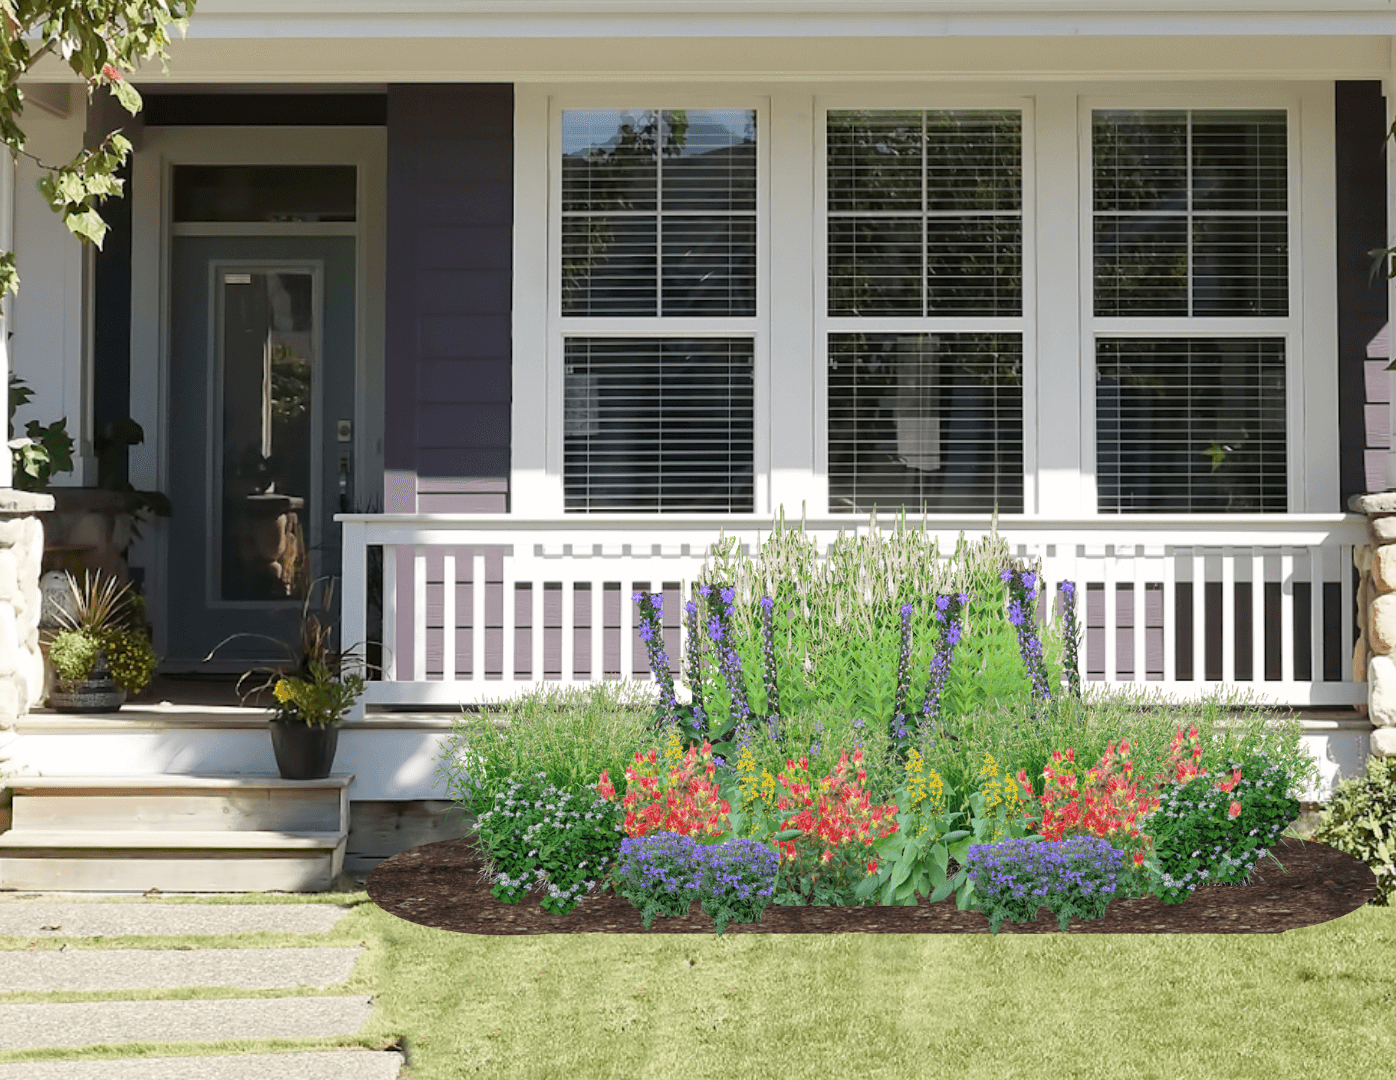 Blue and red native plant garden in front of a gray house